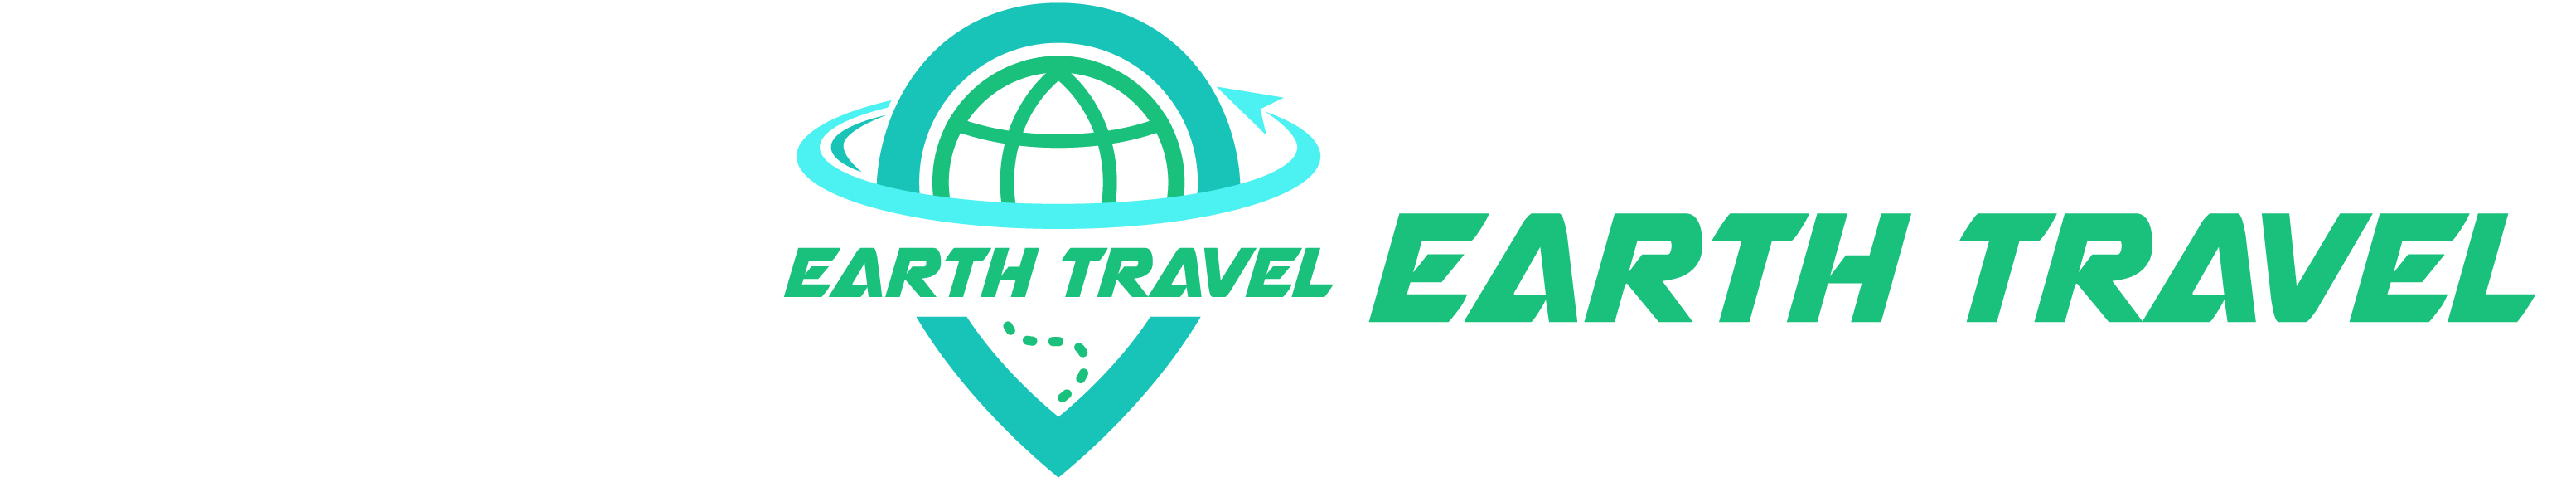 EarthTravel - Best Travel Prices On The Internet!